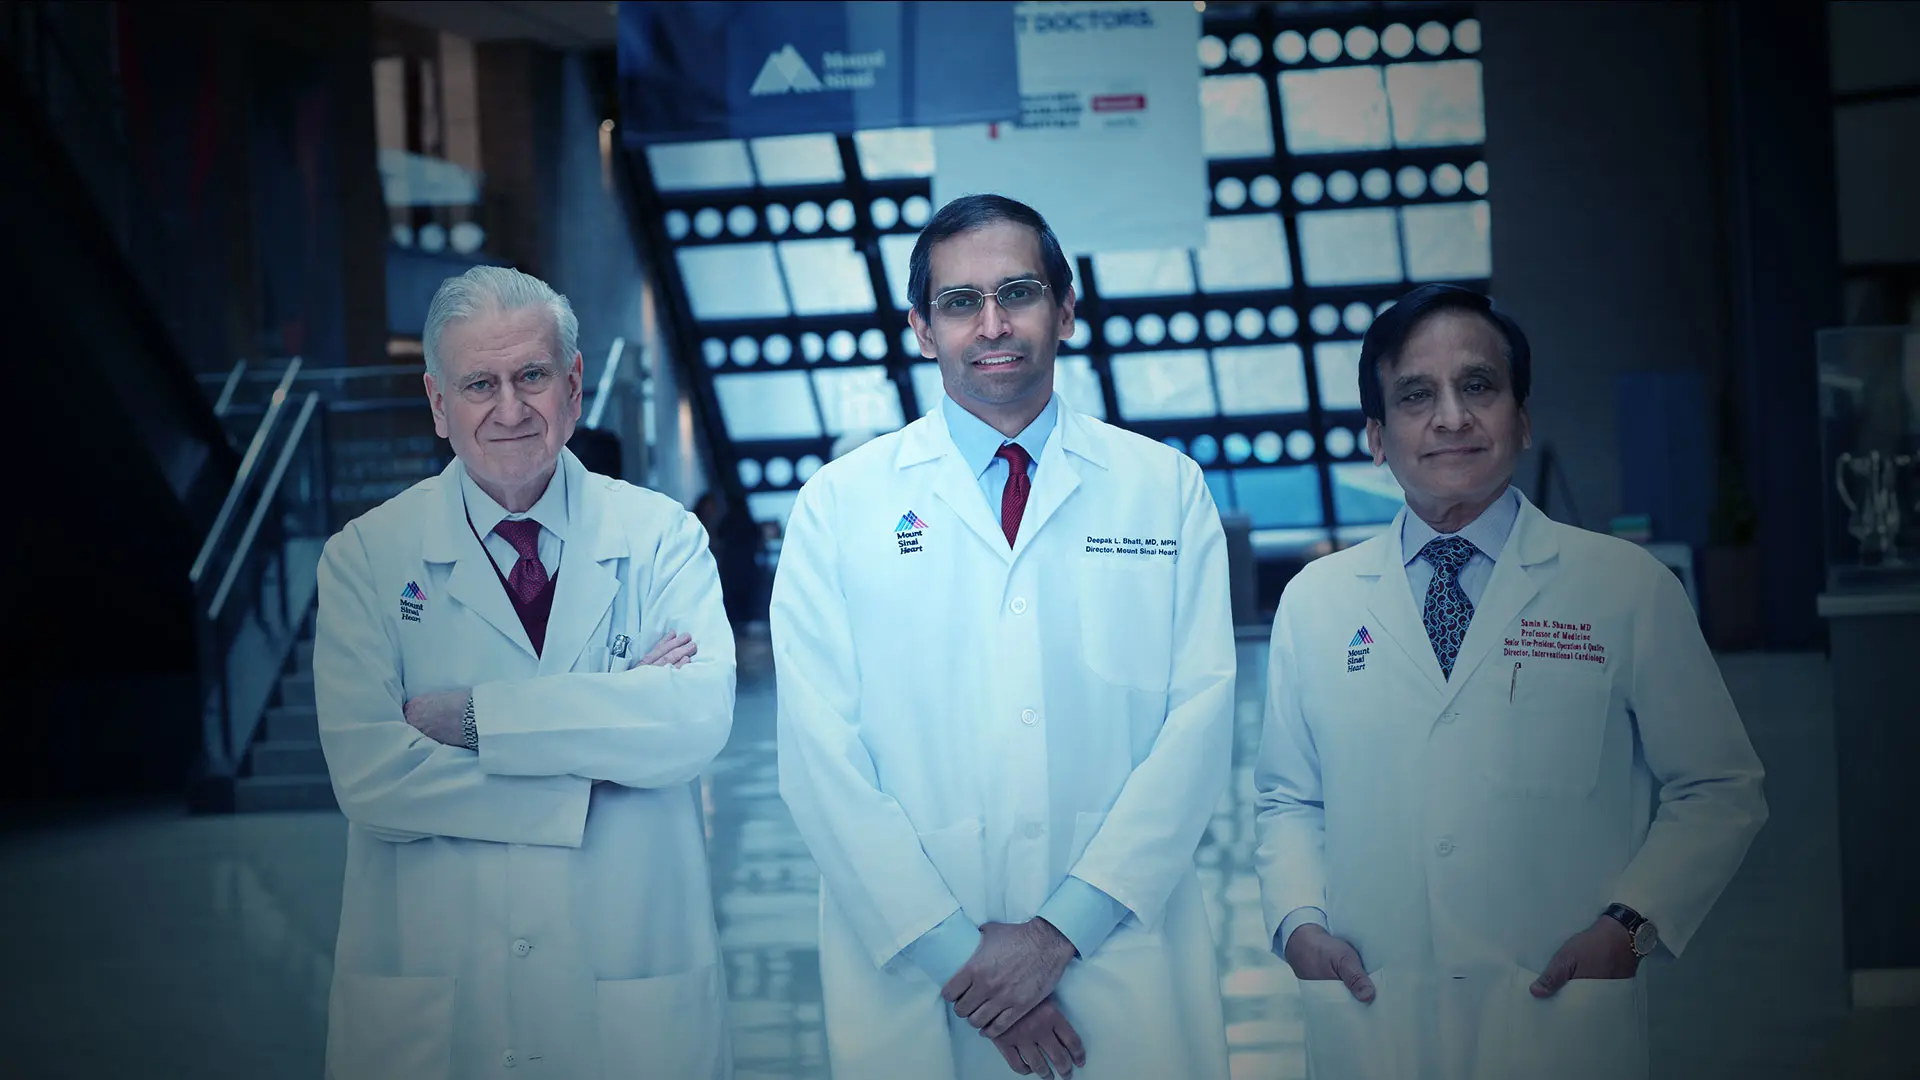 With a New Generation of Leadership, Mount Sinai Heart Positions Itself for Continued Excellence